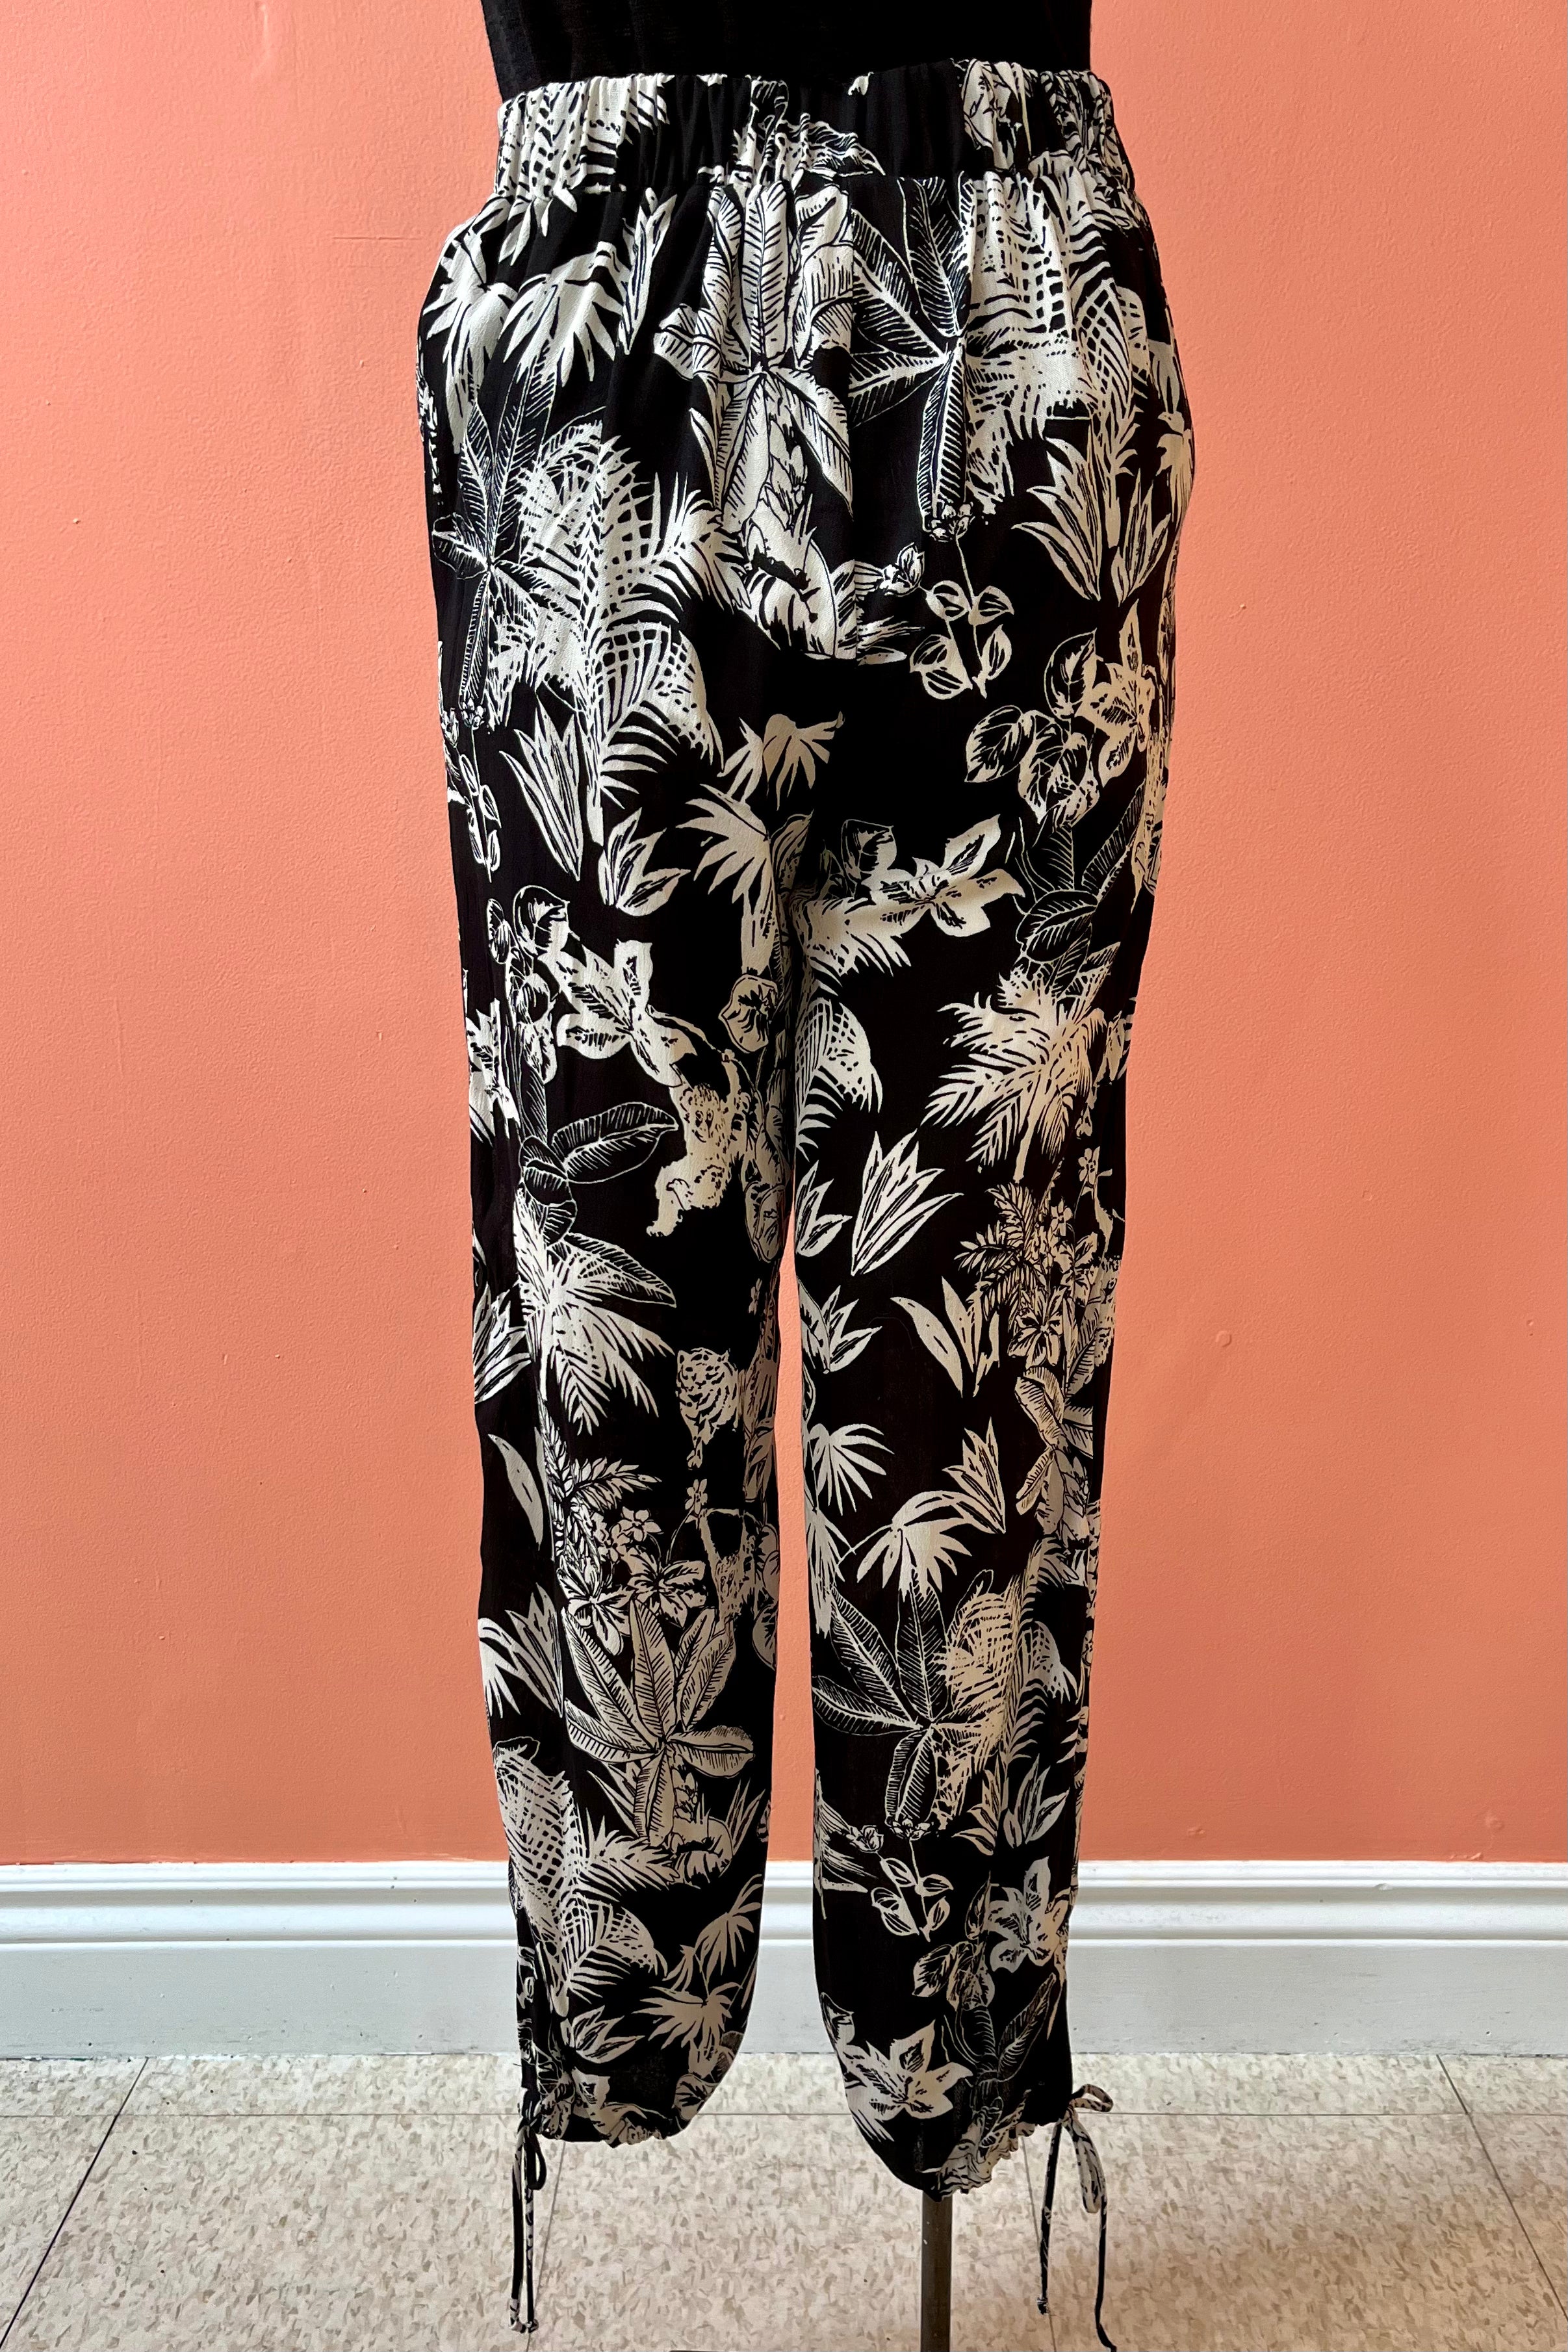 Best Pant by Yul Voy, black and white jungle print, loose fit, elastic waist, cut-out with tie detail at ankles, sizes XS-XXL, made in Montreal